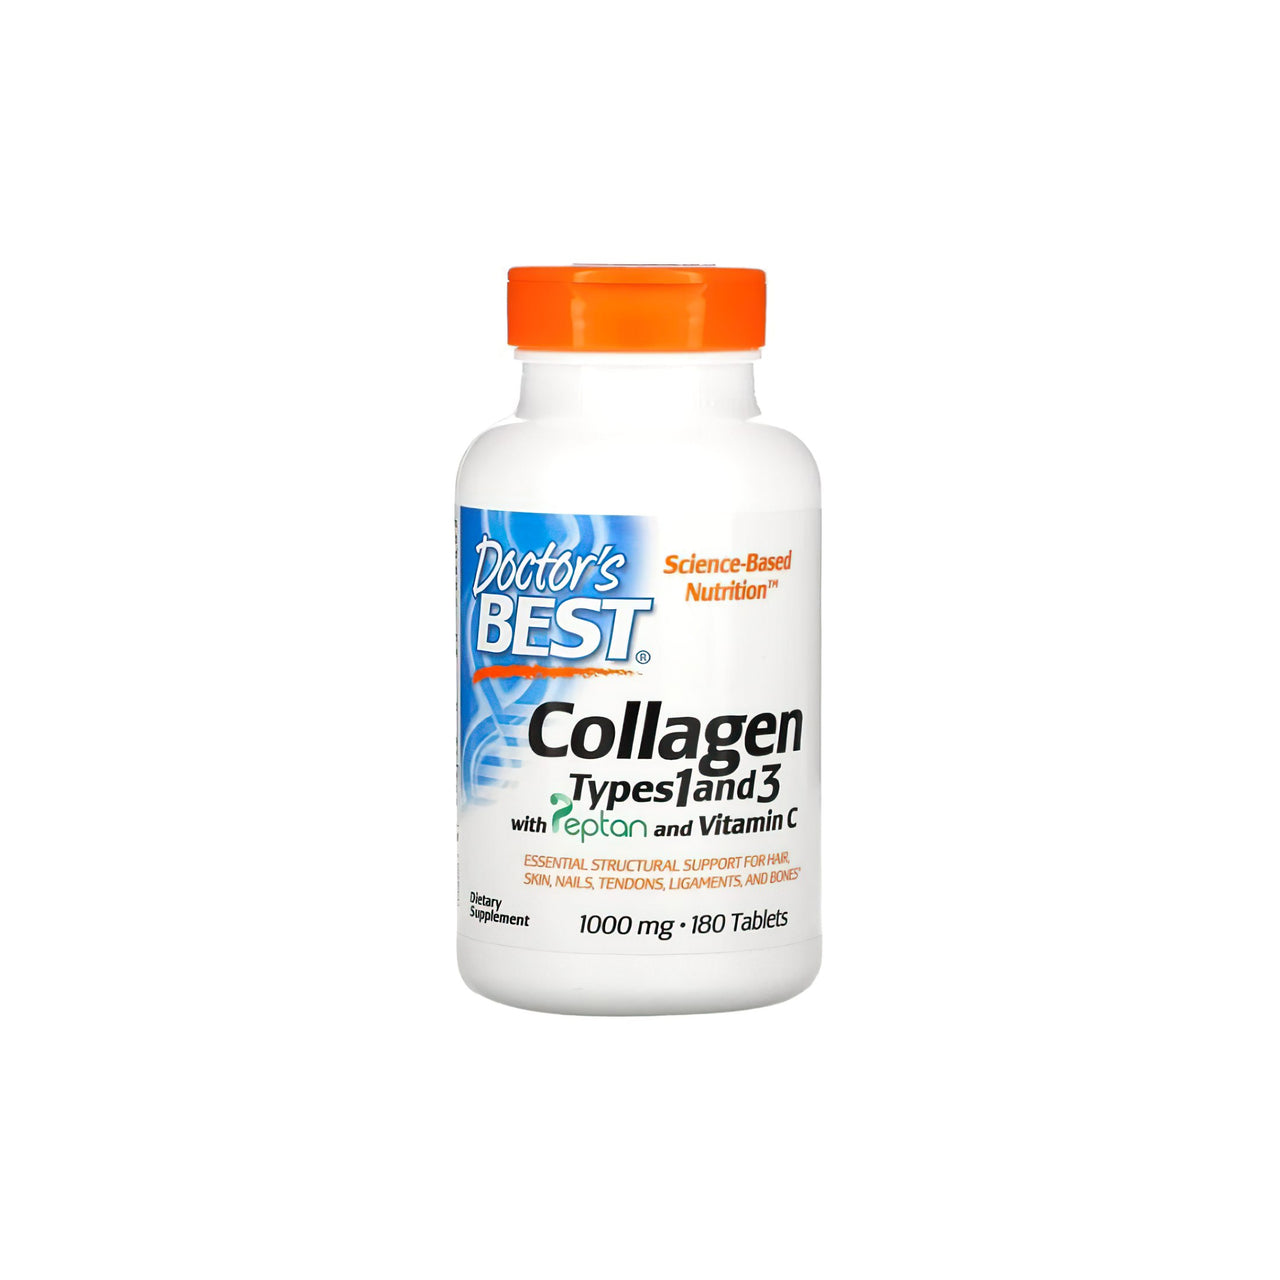 A bottle of Doctor's Best Collagen types 1 and 3 1000 mg 180 tablets, the best collagen supplement.